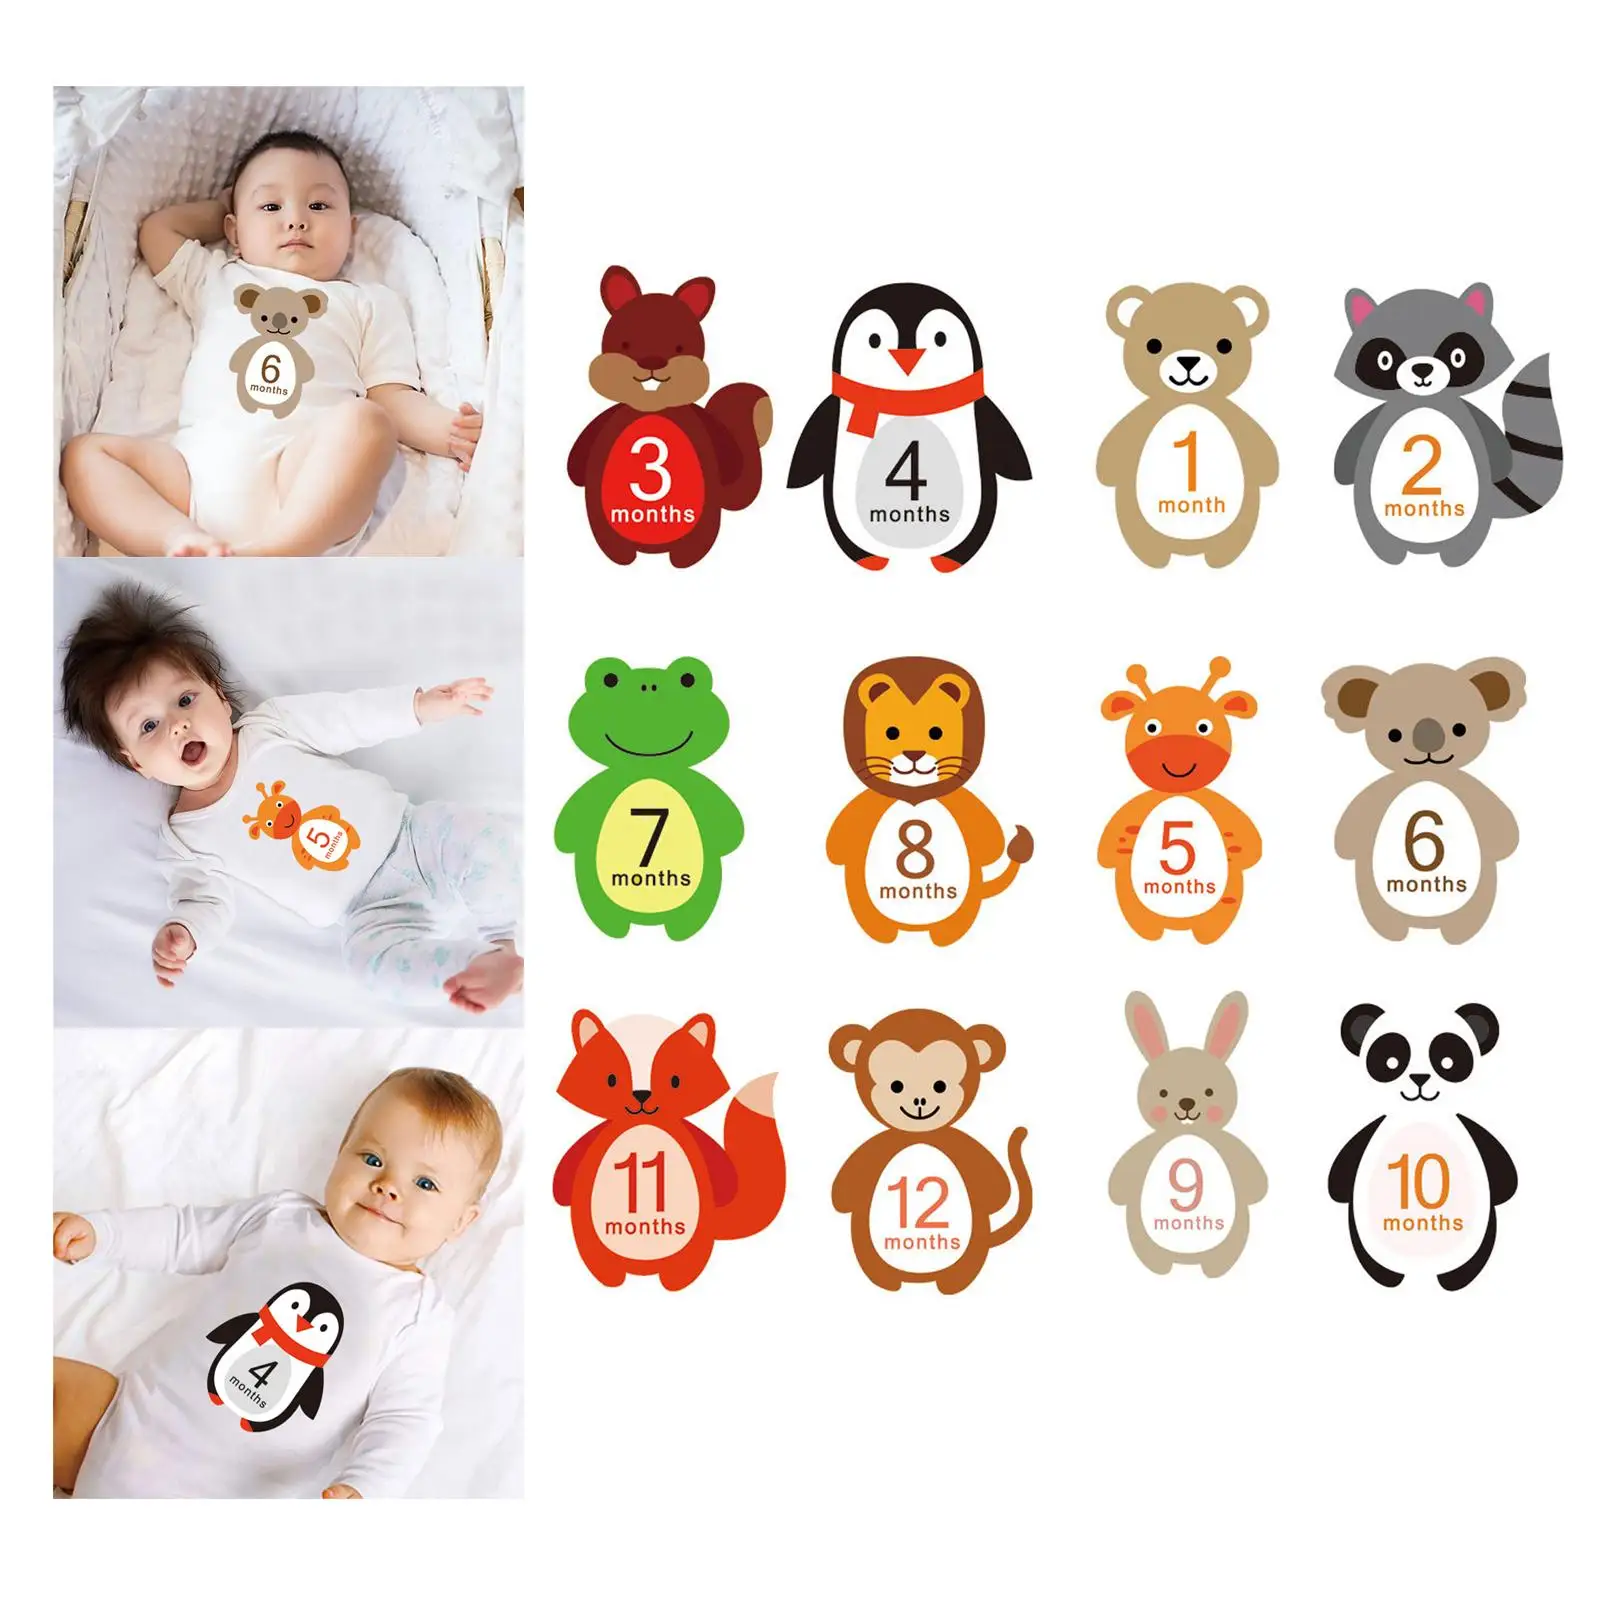 12 Pieces Bby Monthly Stickers Crtoon niml Shped Milestone Stickers Gender Neutrl 1-12 Month Posing Props Bby Shower